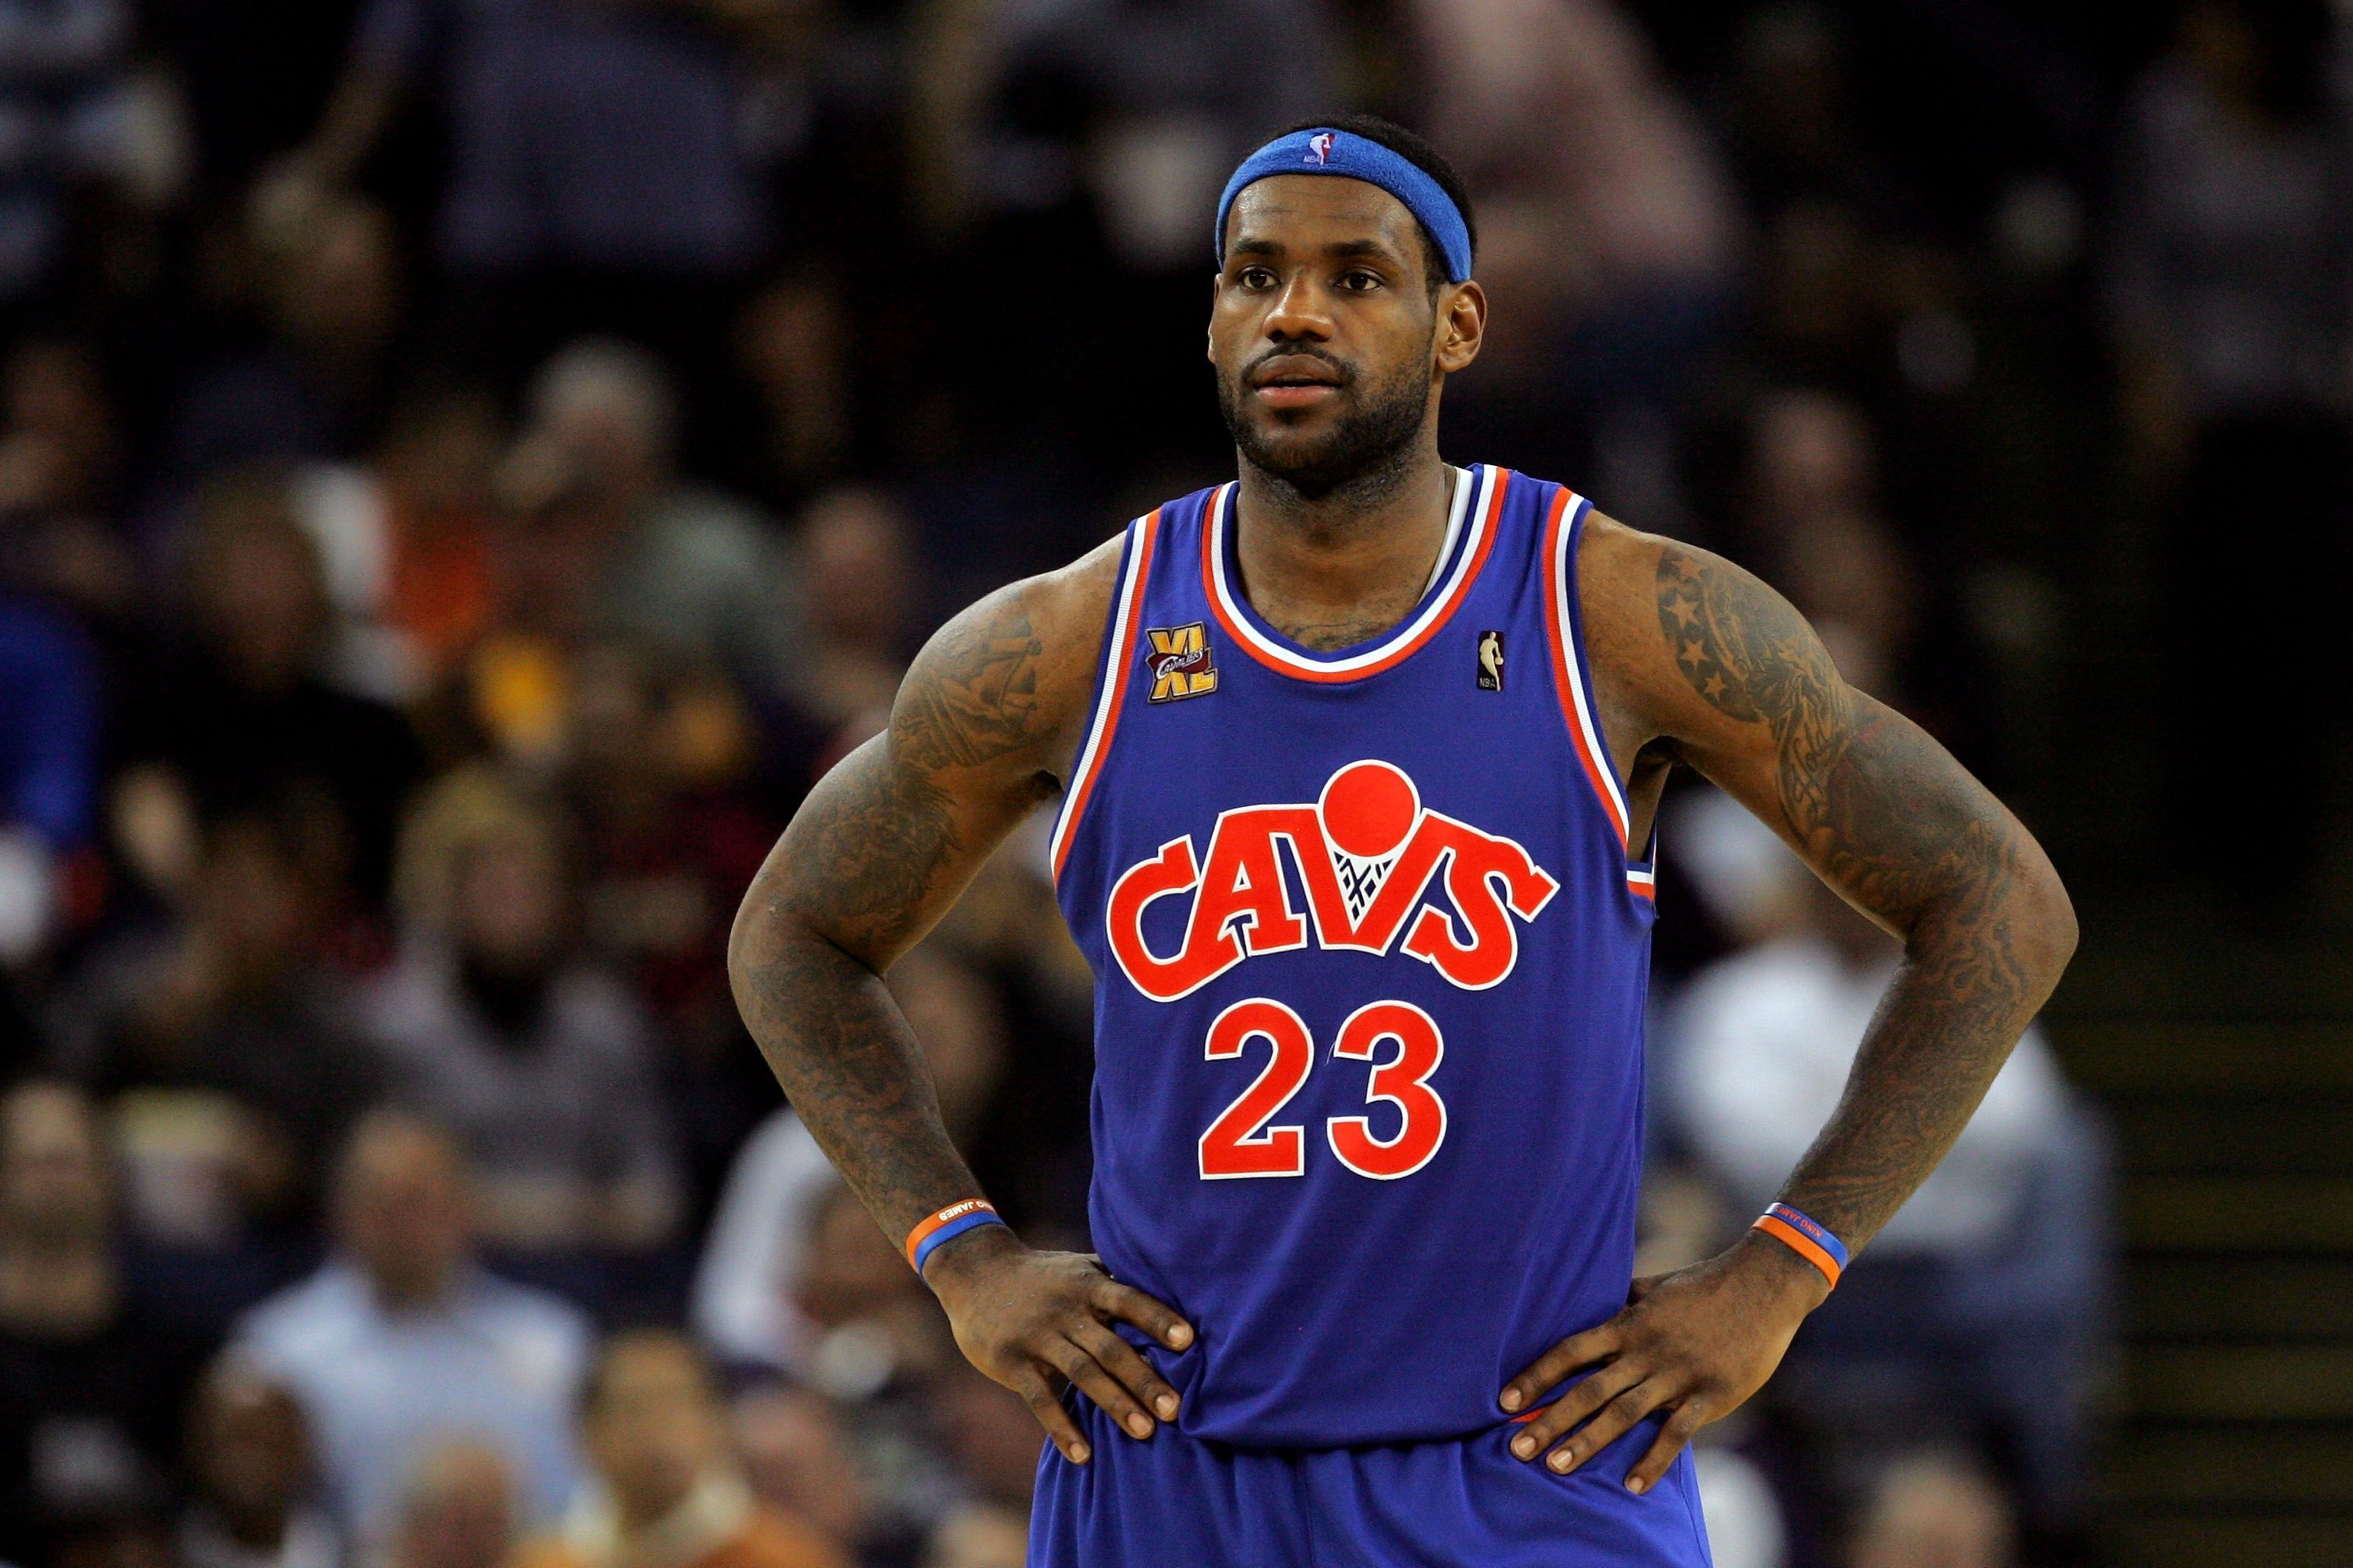 Pros and Cons If LeBron James Would Return to Cleveland Cavaliers